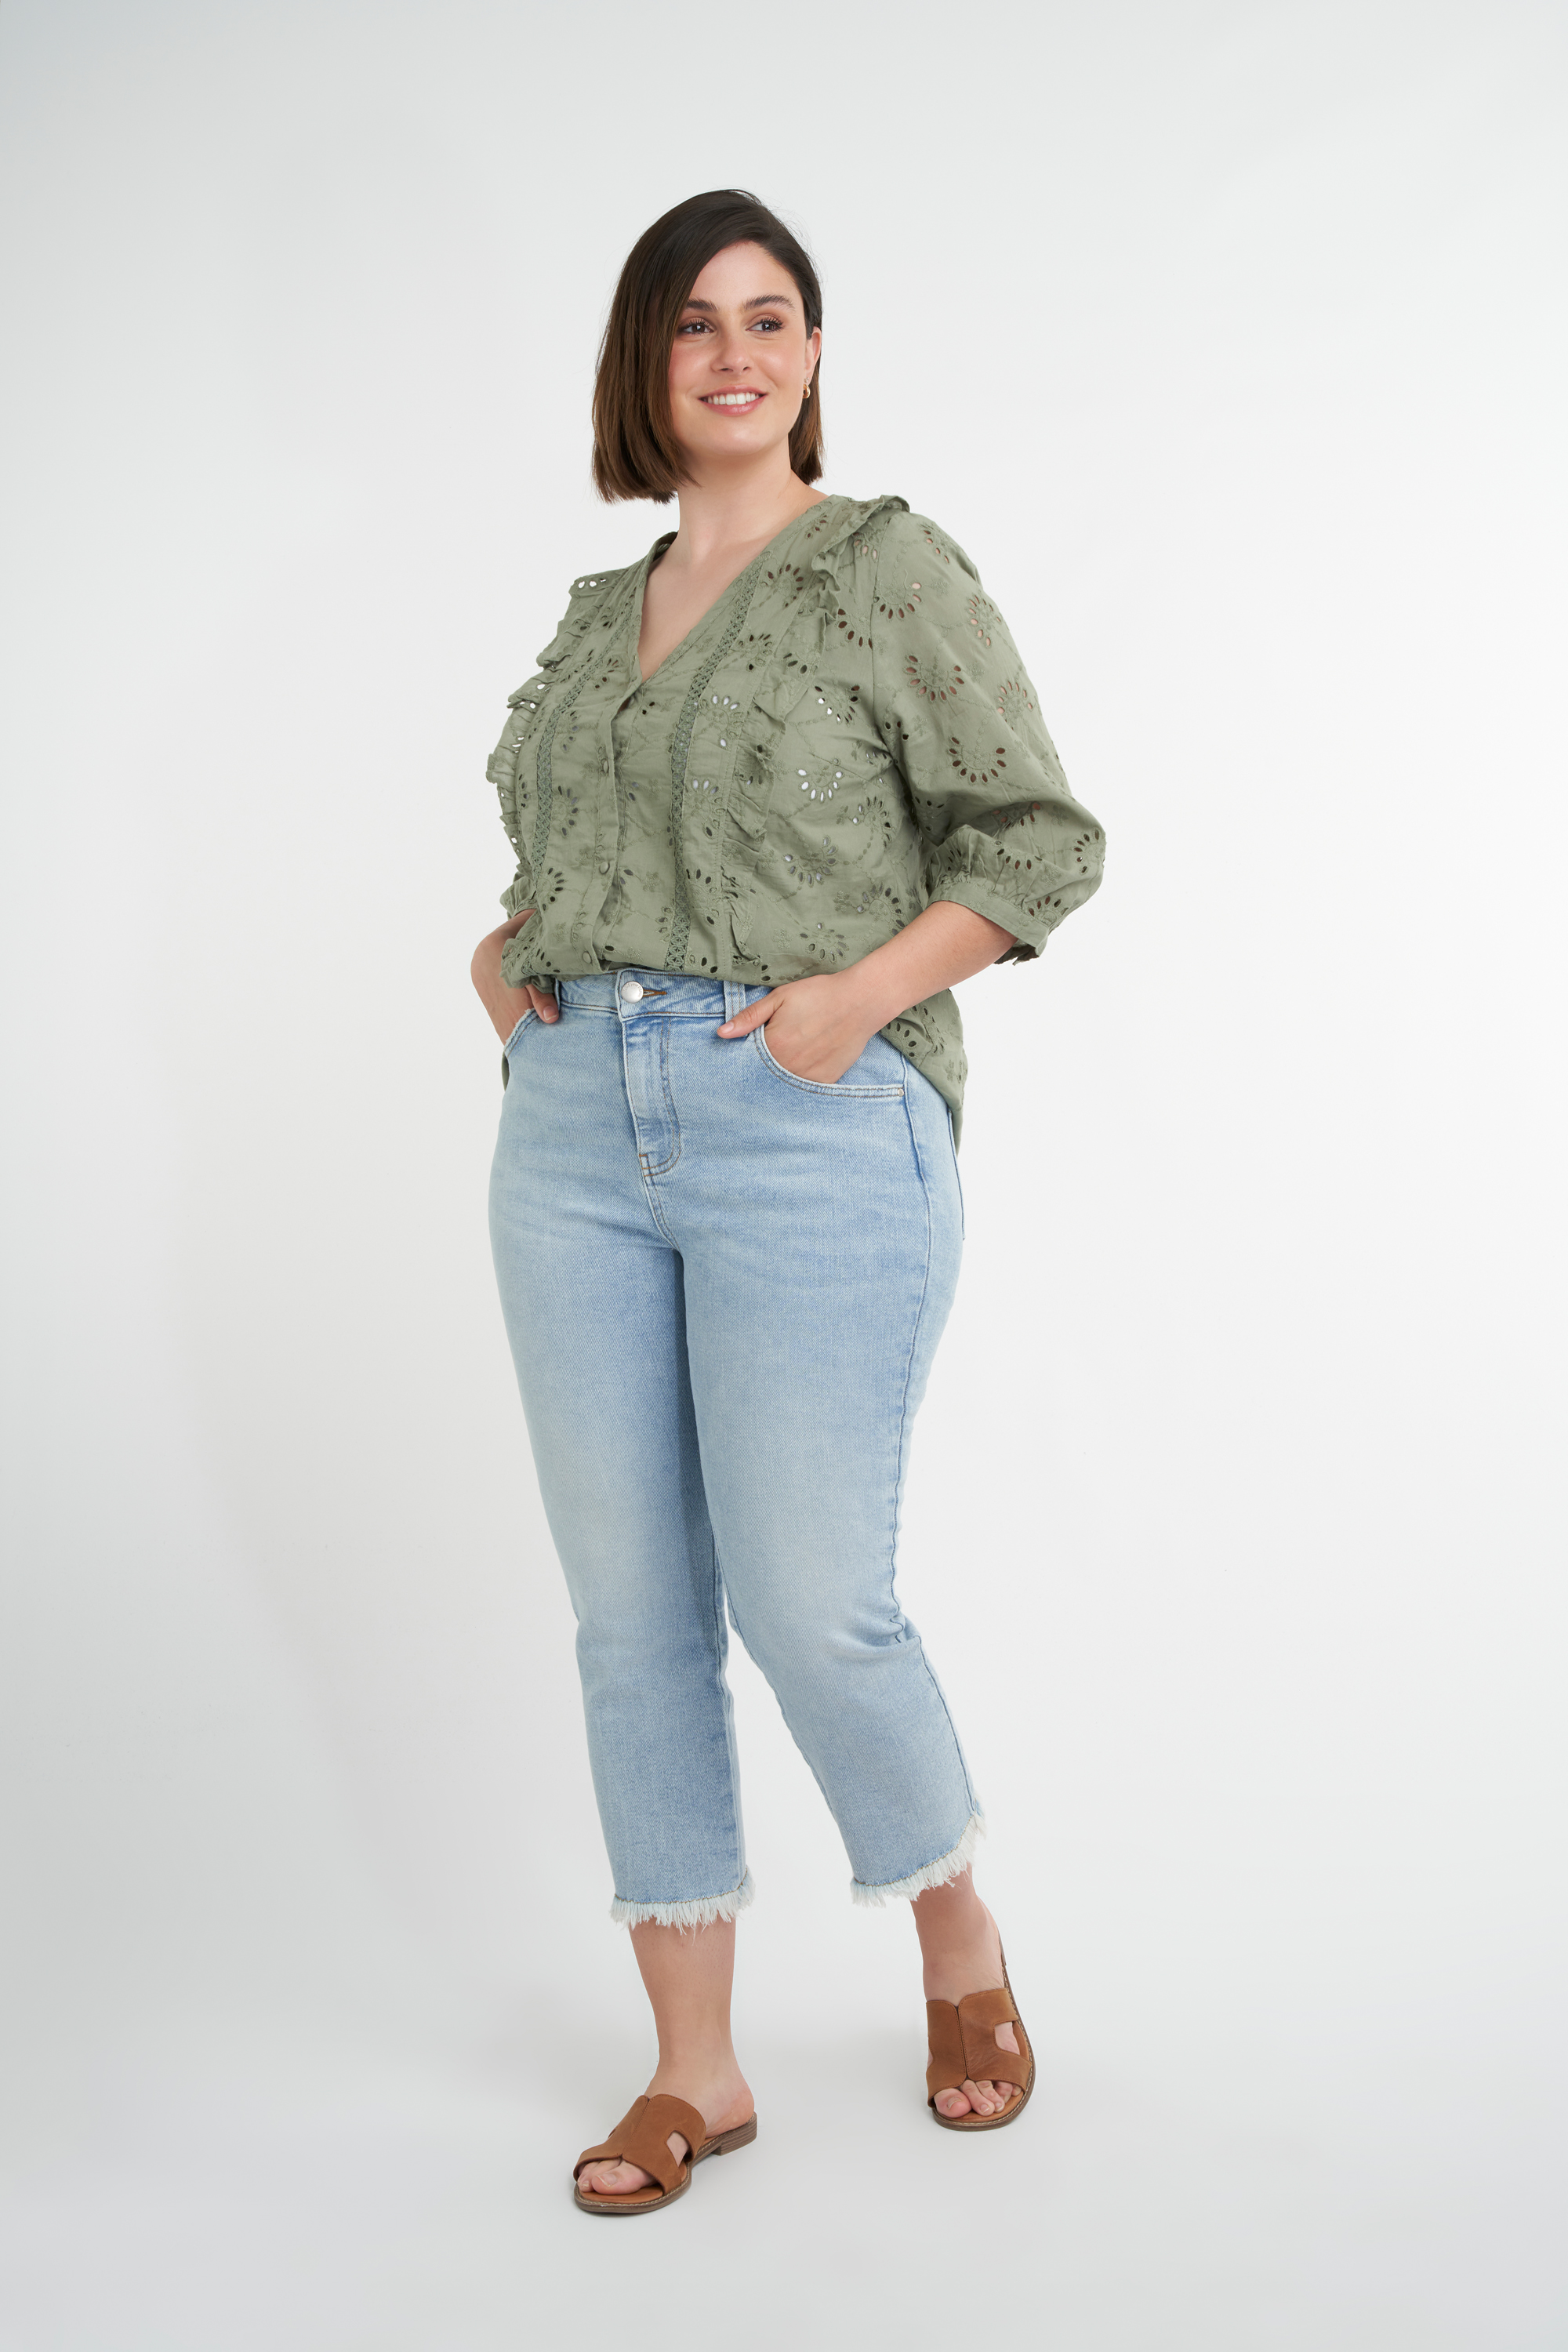 Broderie angliase blouse image 6